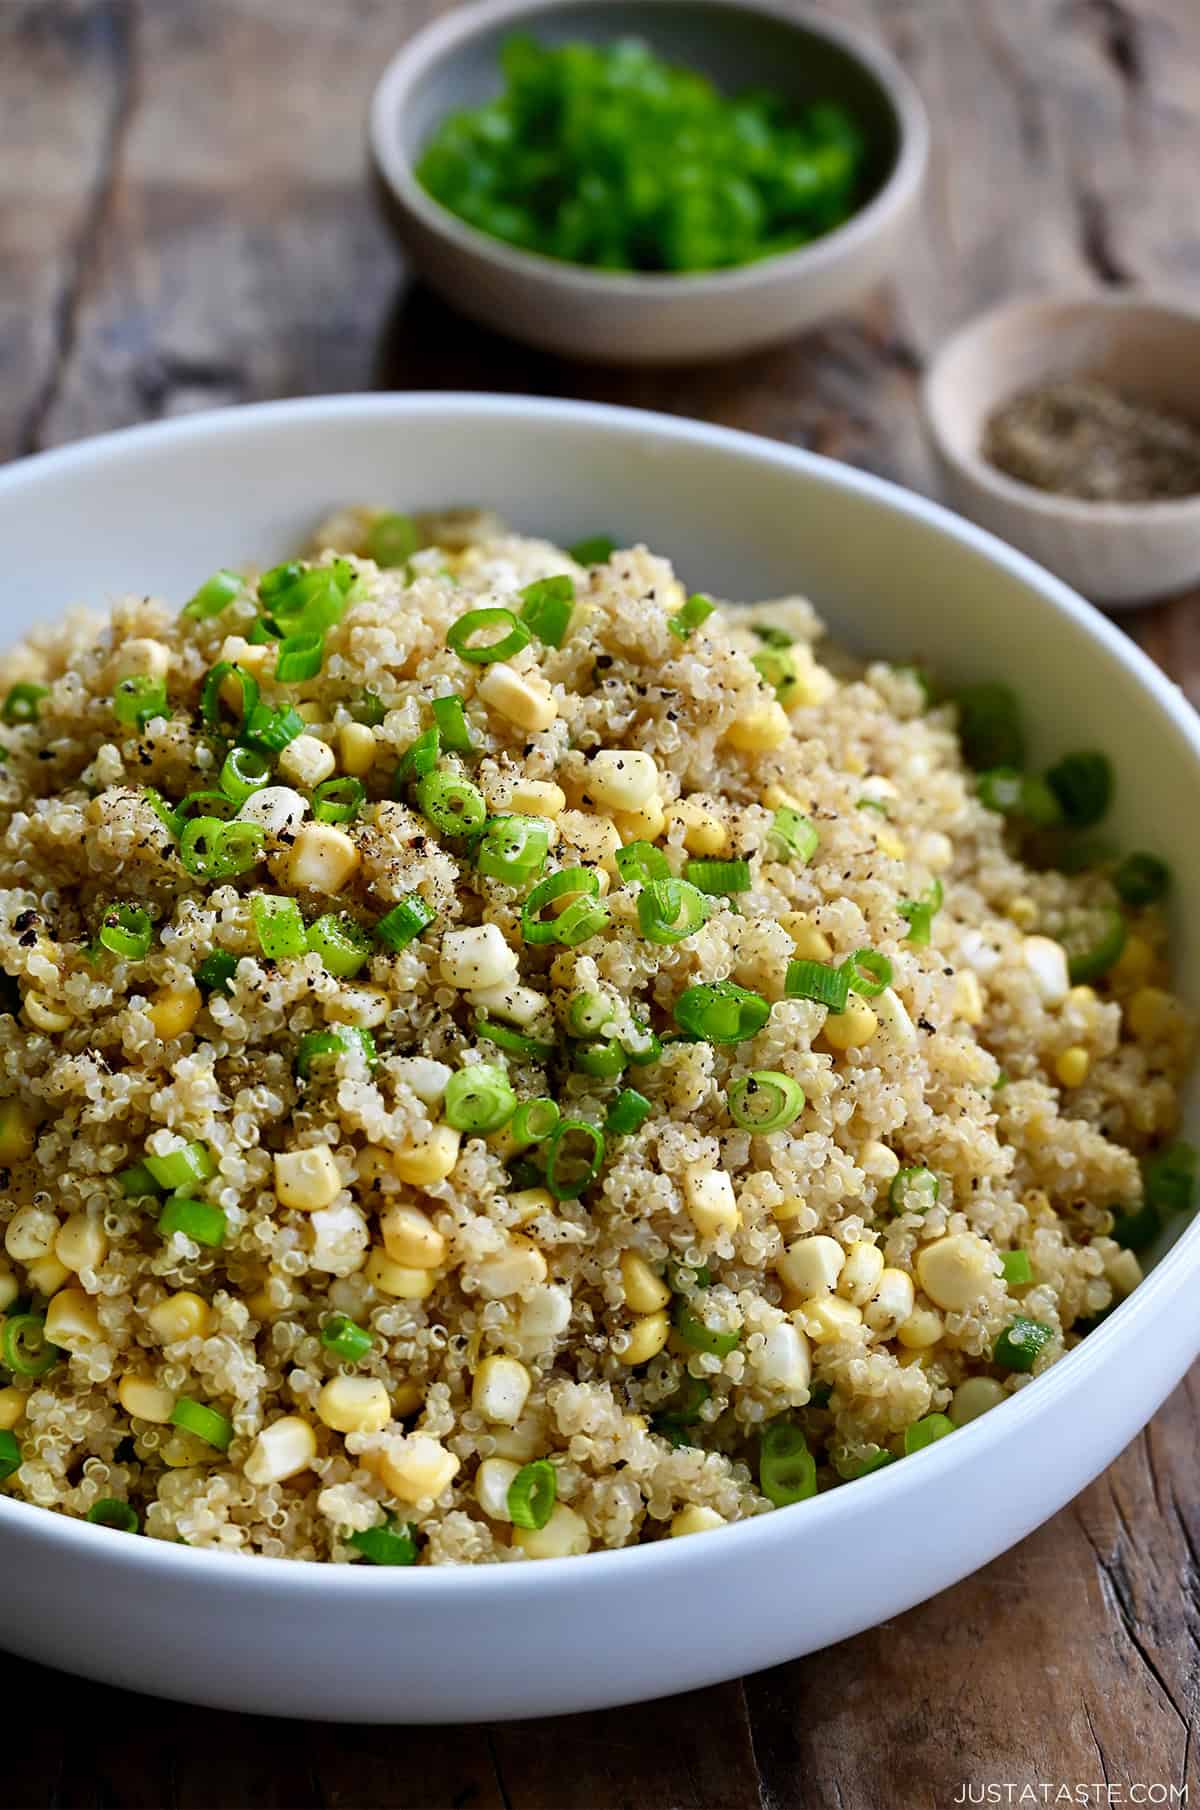 Quinoa with corn and scallions and topped with ground black pepper in a large white serving bowl. Small bowls of sliced scallions and ground black pepper are behind the serving bowl.